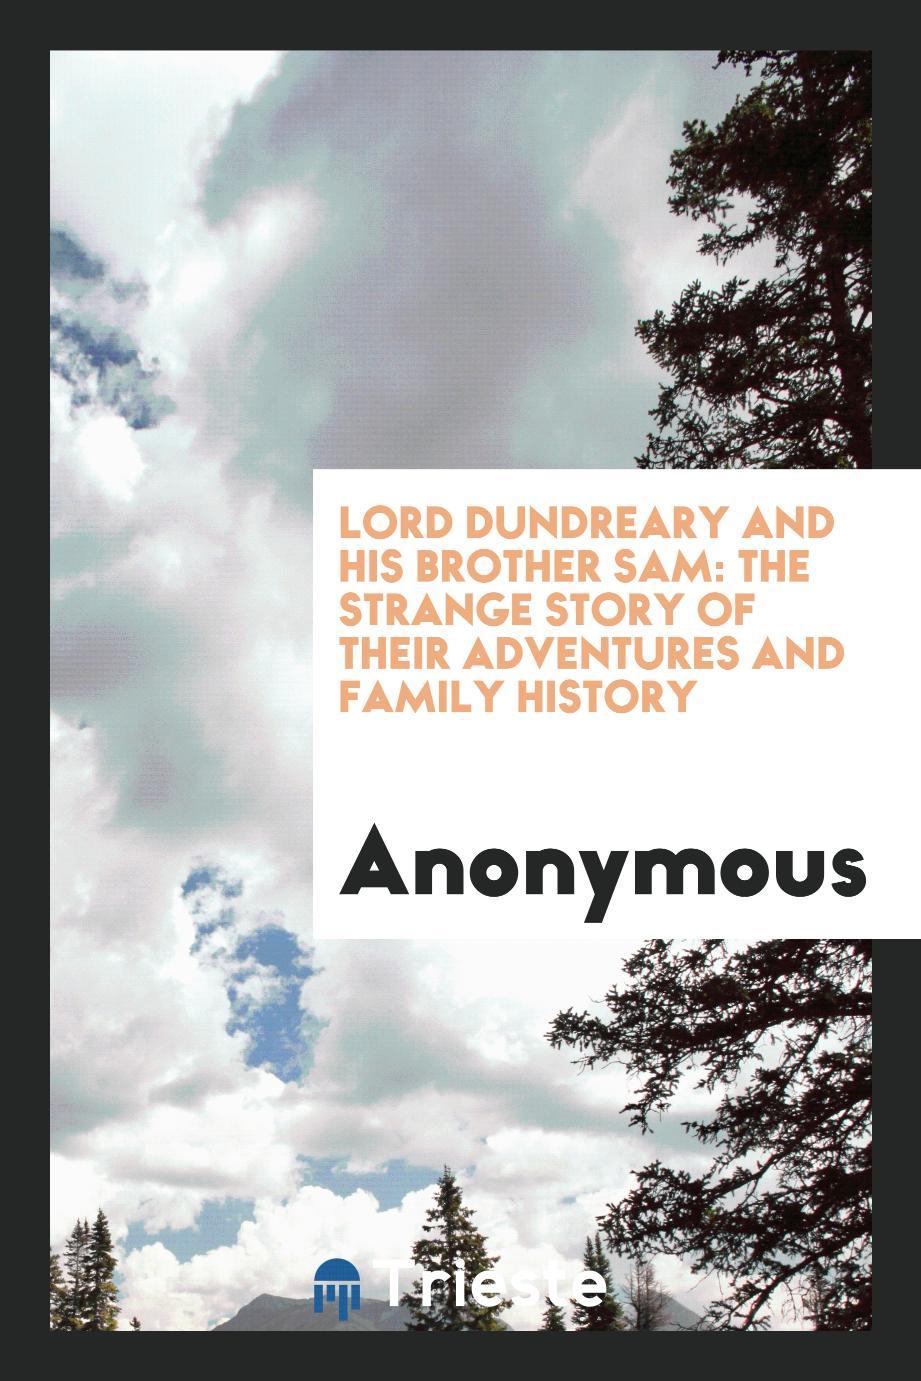 Lord Dundreary and His Brother Sam: The Strange Story of Their Adventures and Family History